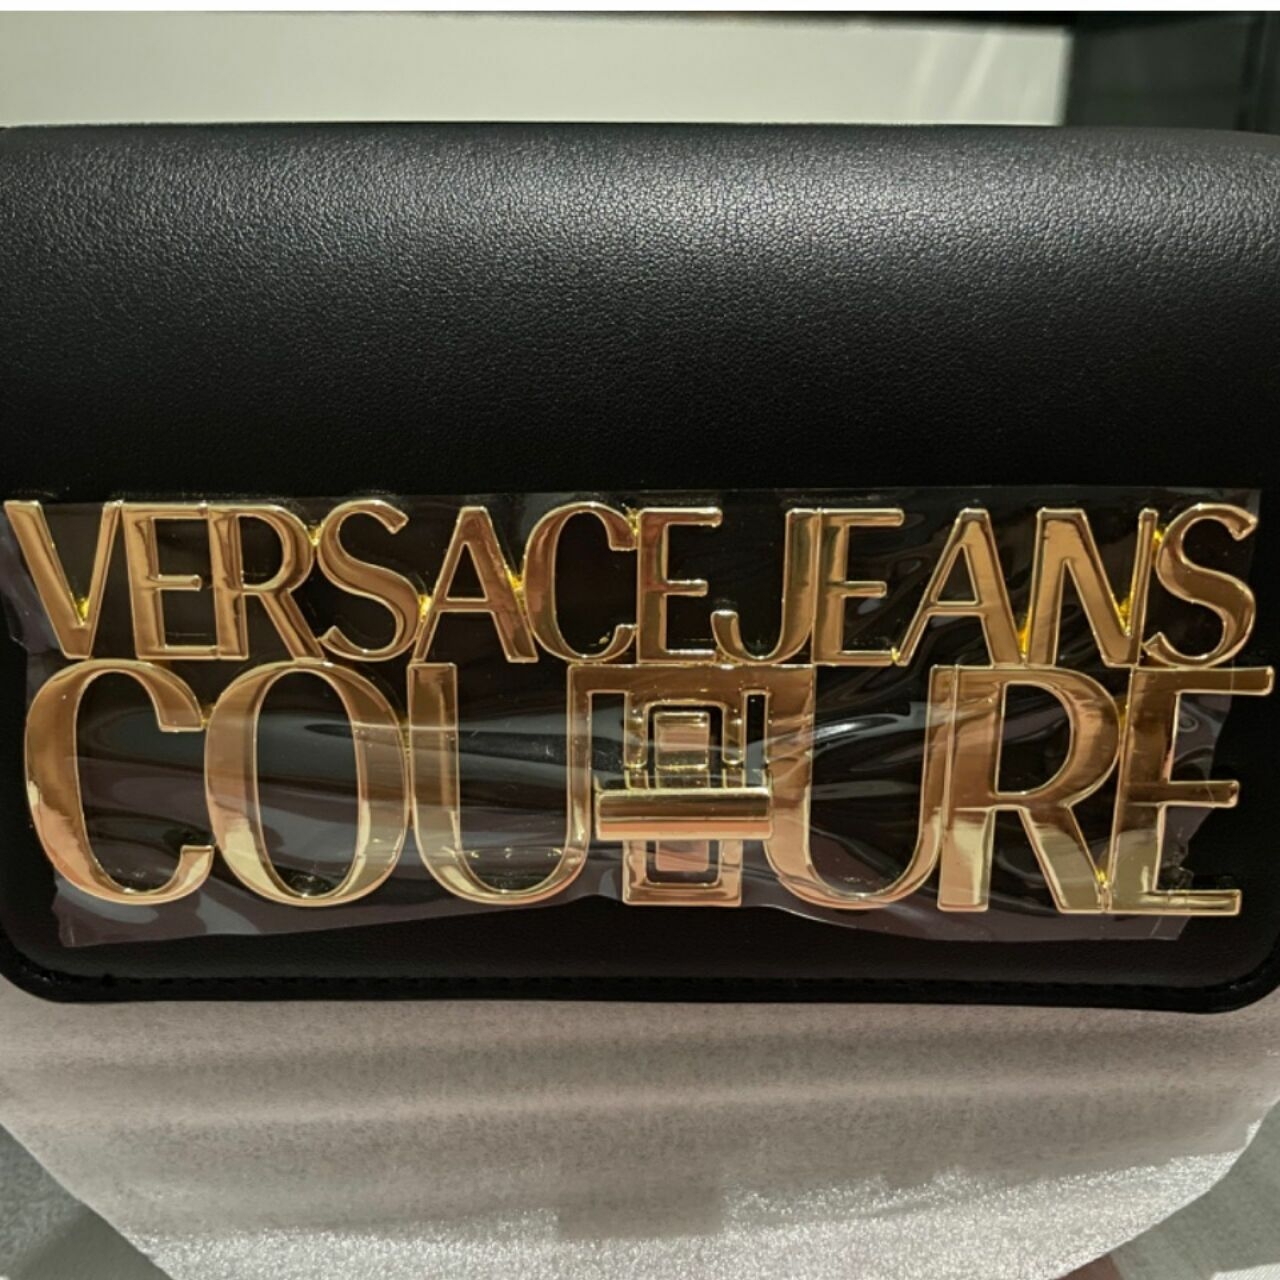 Versace Jeans Couture Black Sling Bag